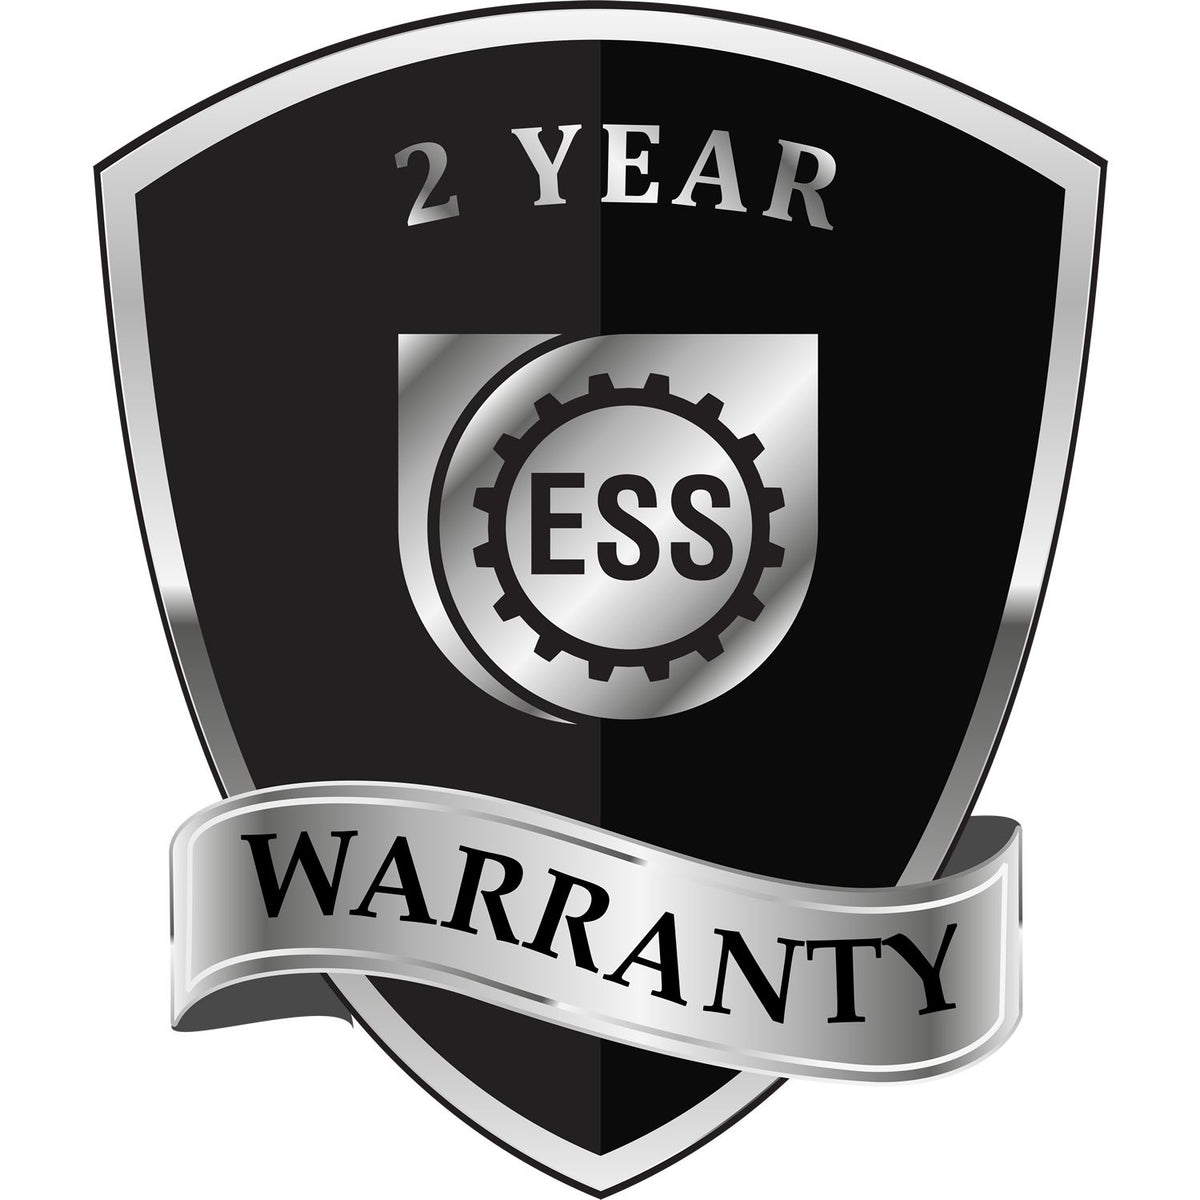 A black and silver badge or emblem showing warranty information for the Hybrid Nevada Geologist Seal